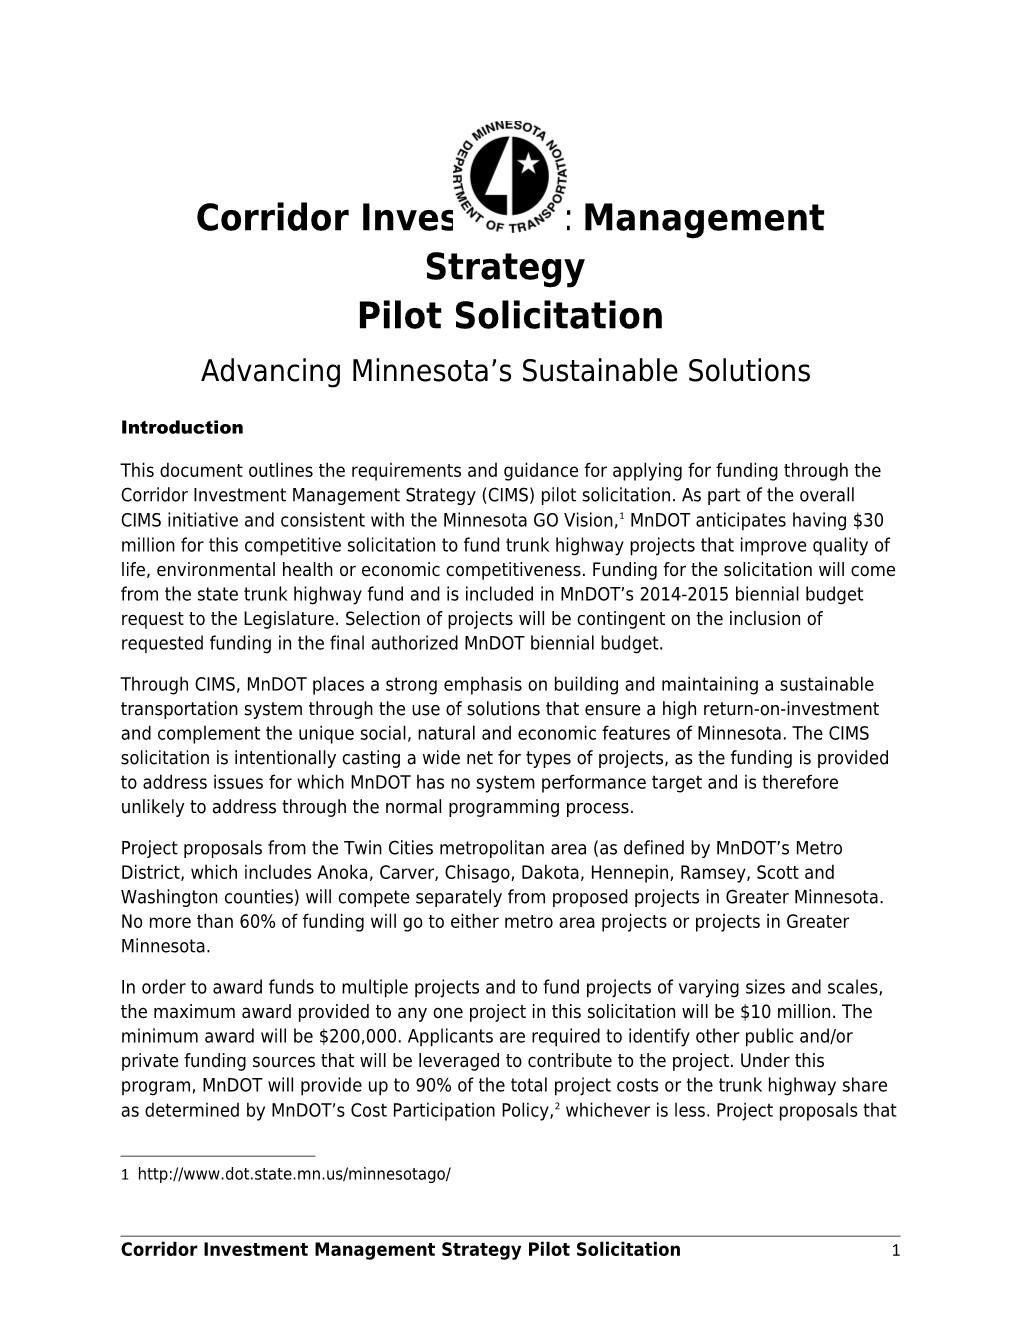 Corridor Investment Management Strategy